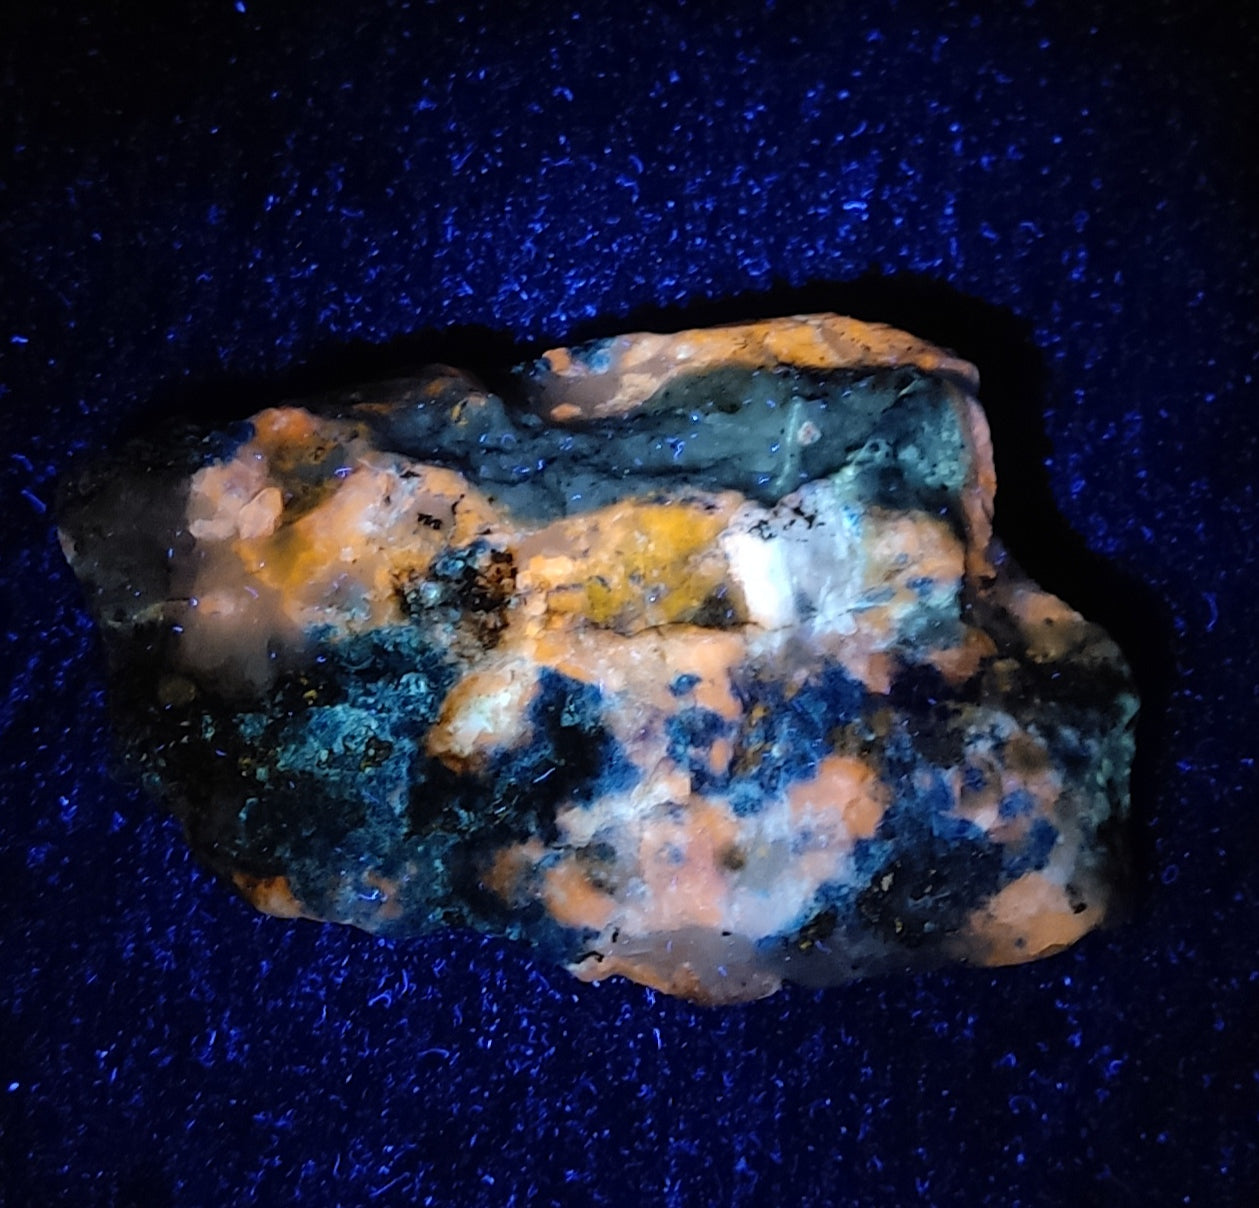 Fluorescent natural afghanite/sodalite on matrix with pyrite 78 grams